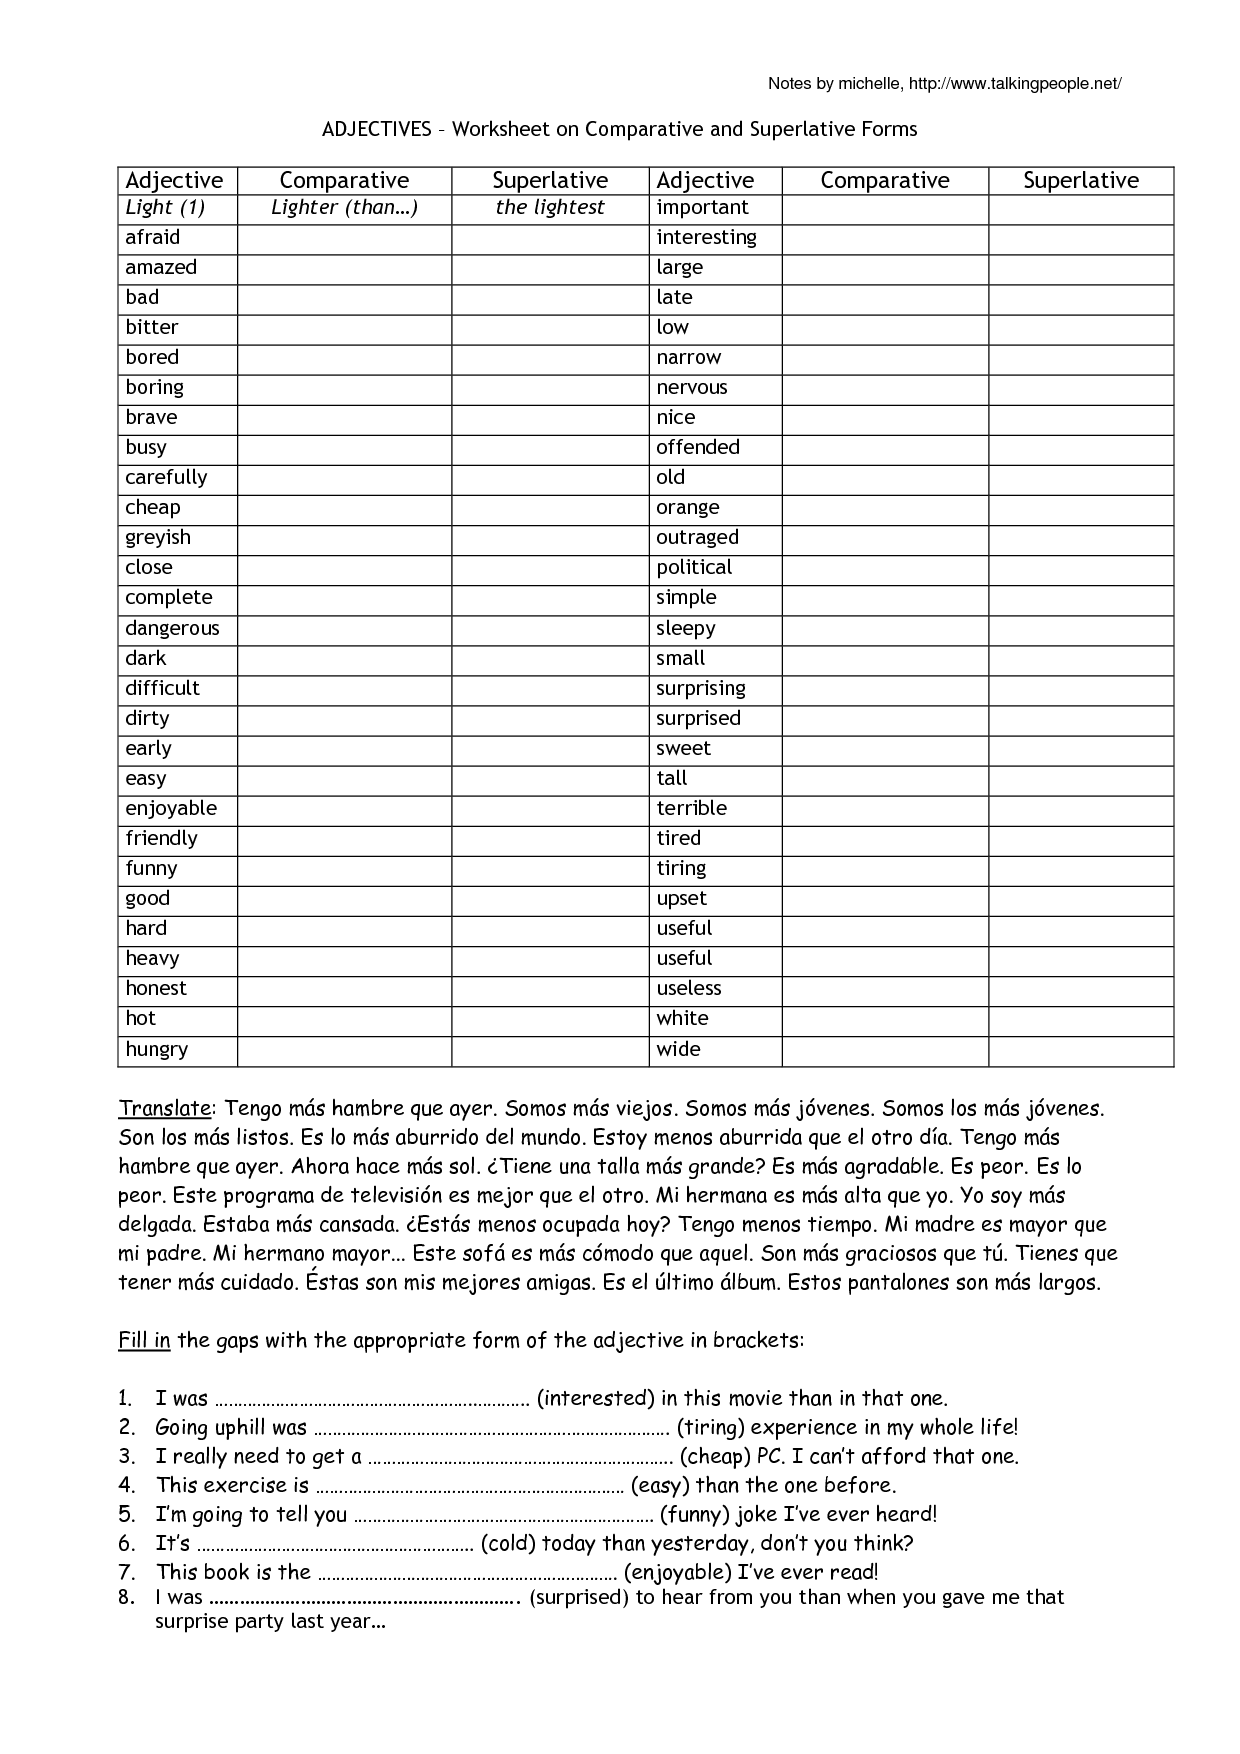 literacy-comparative-and-superlative-adjectives-worksheet-primaryleap-co-uk